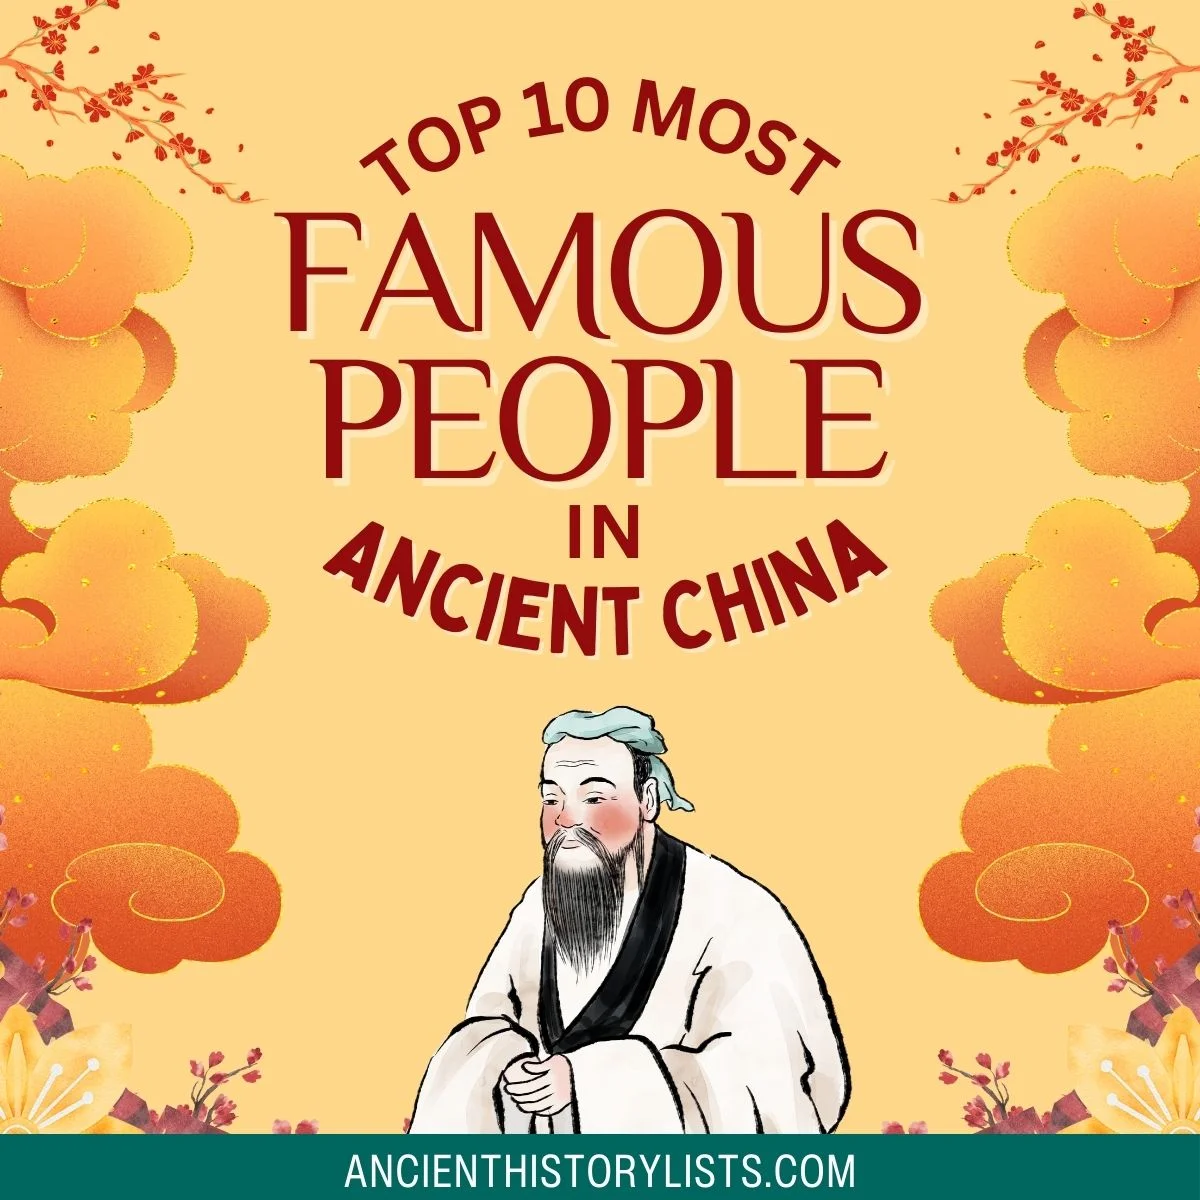 Most Famous People in Ancient China